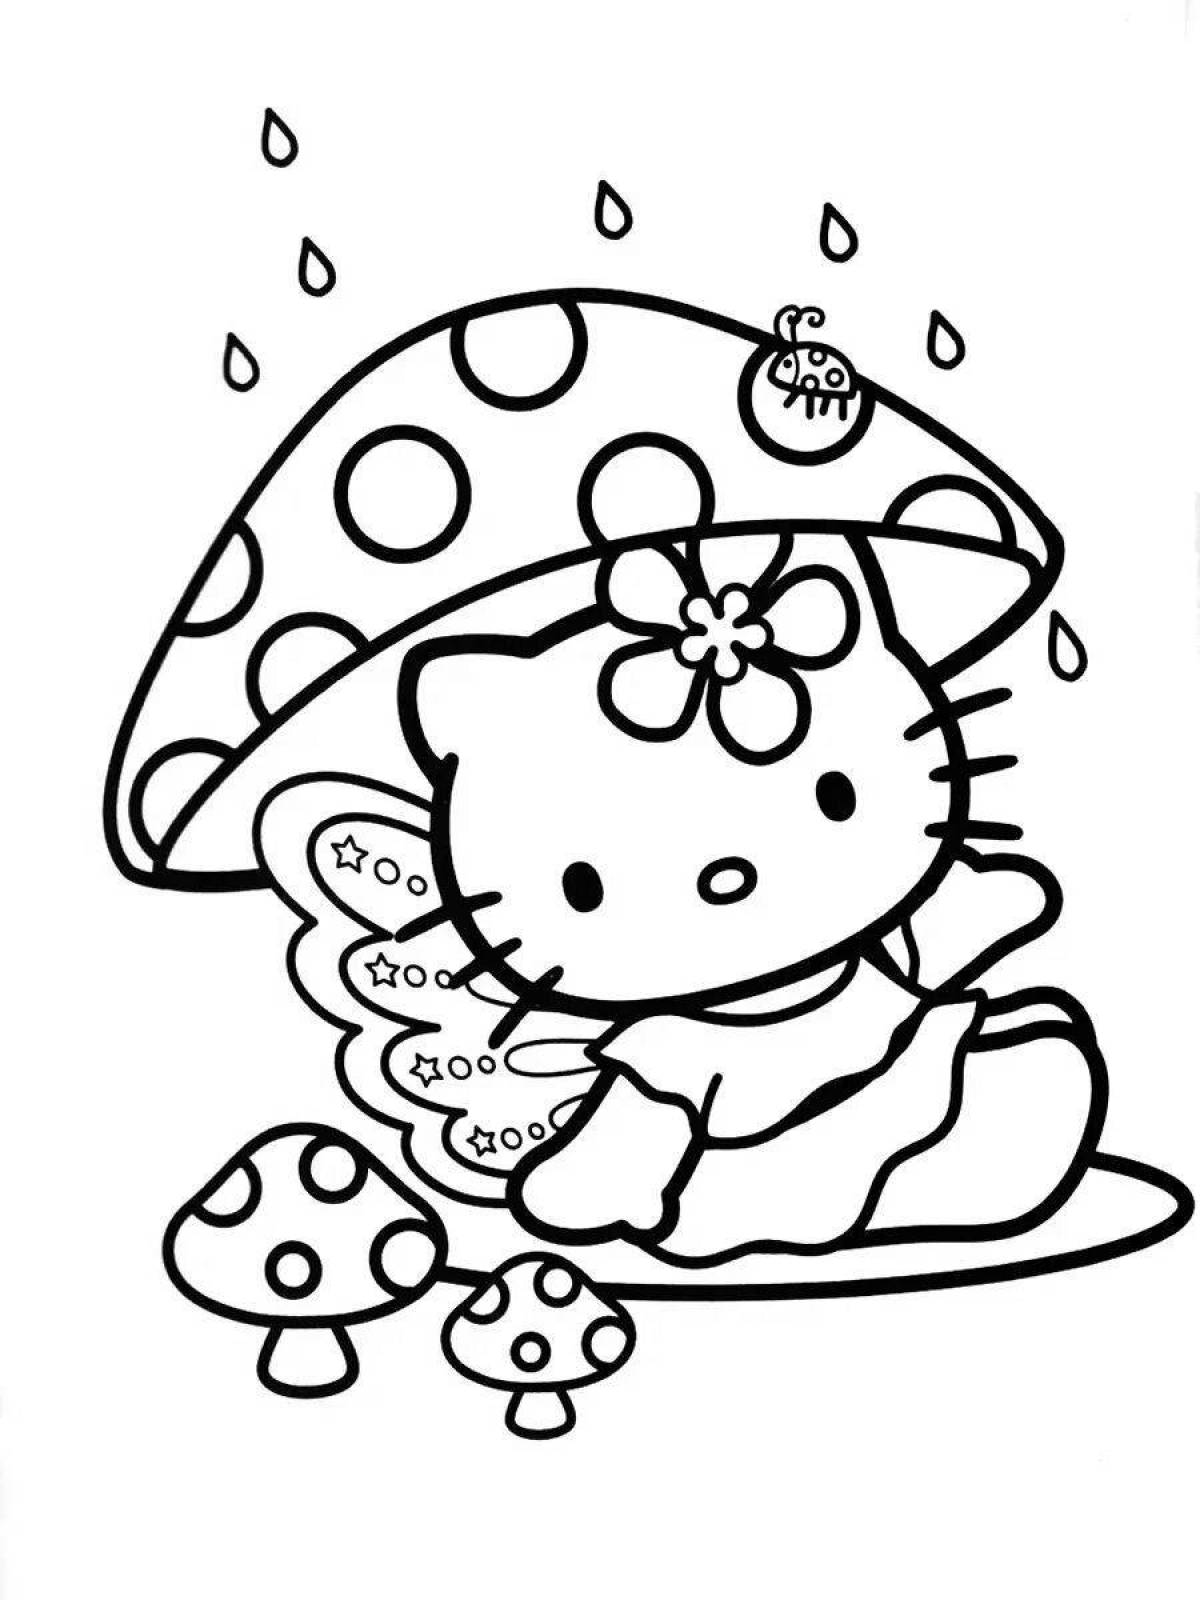 Playful hello kitty chick coloring page